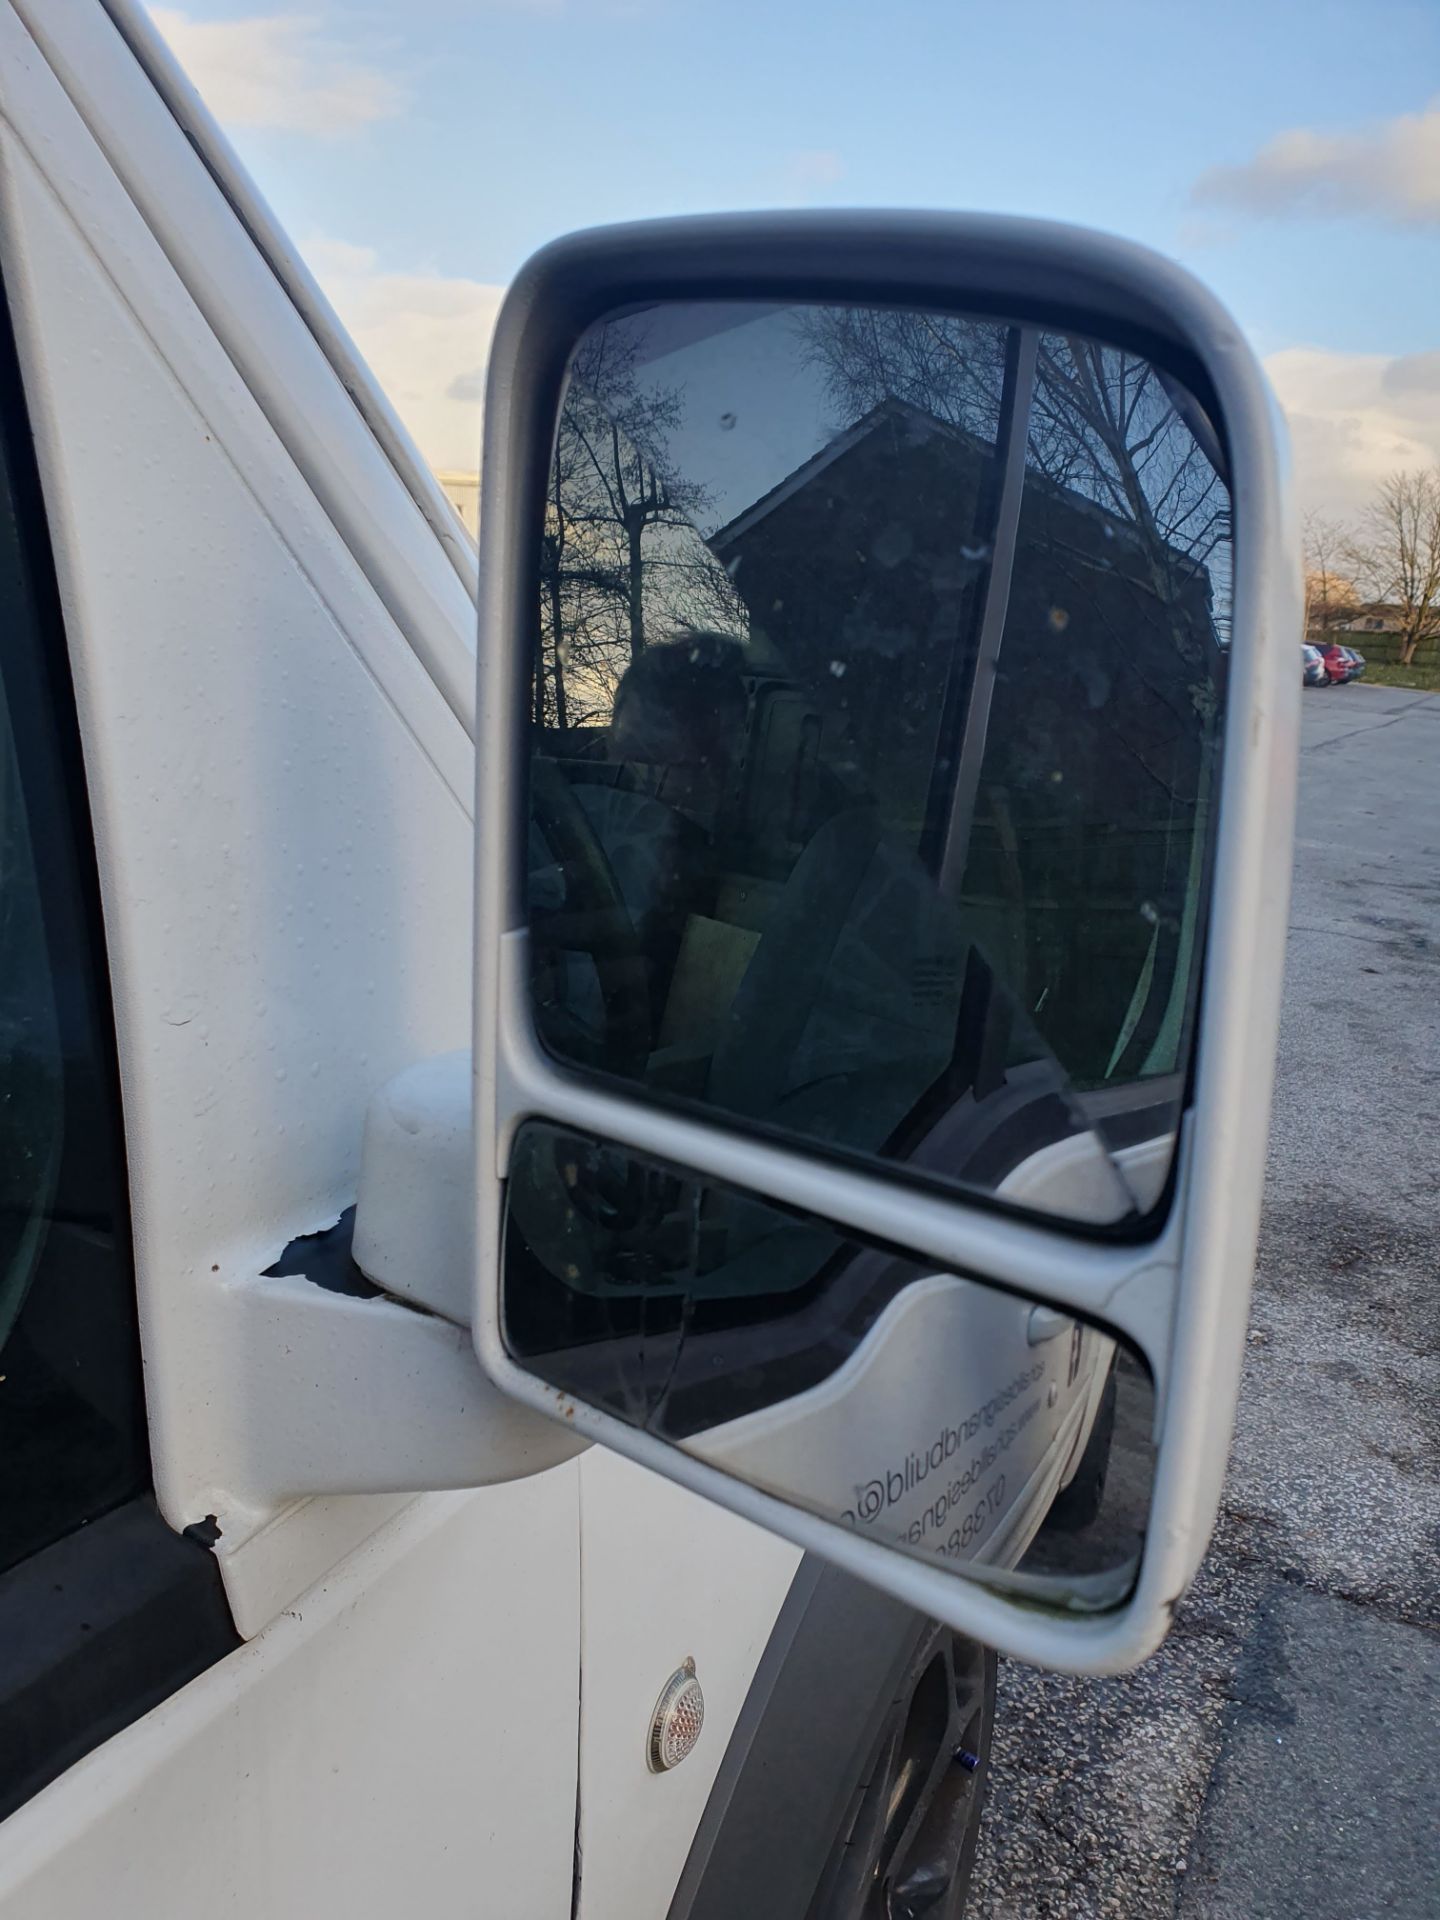 Ford Transit Connect 90 T200 Trend Diesel Panel Van | MF59 DYX | 179,496 Miles - Image 9 of 14